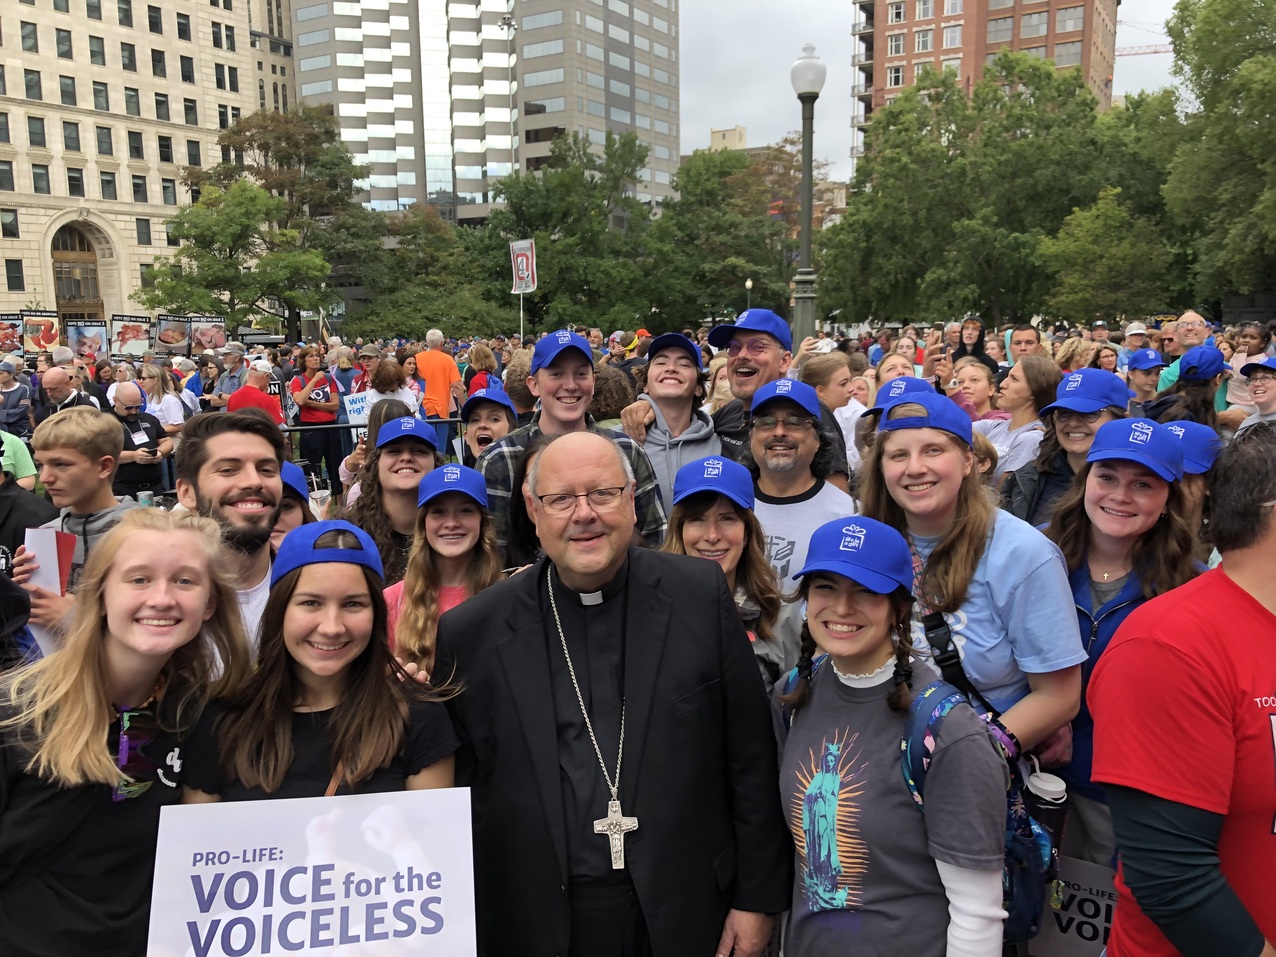 Diocesan delegation, Bishop Malesic participate in Ohio March for Life